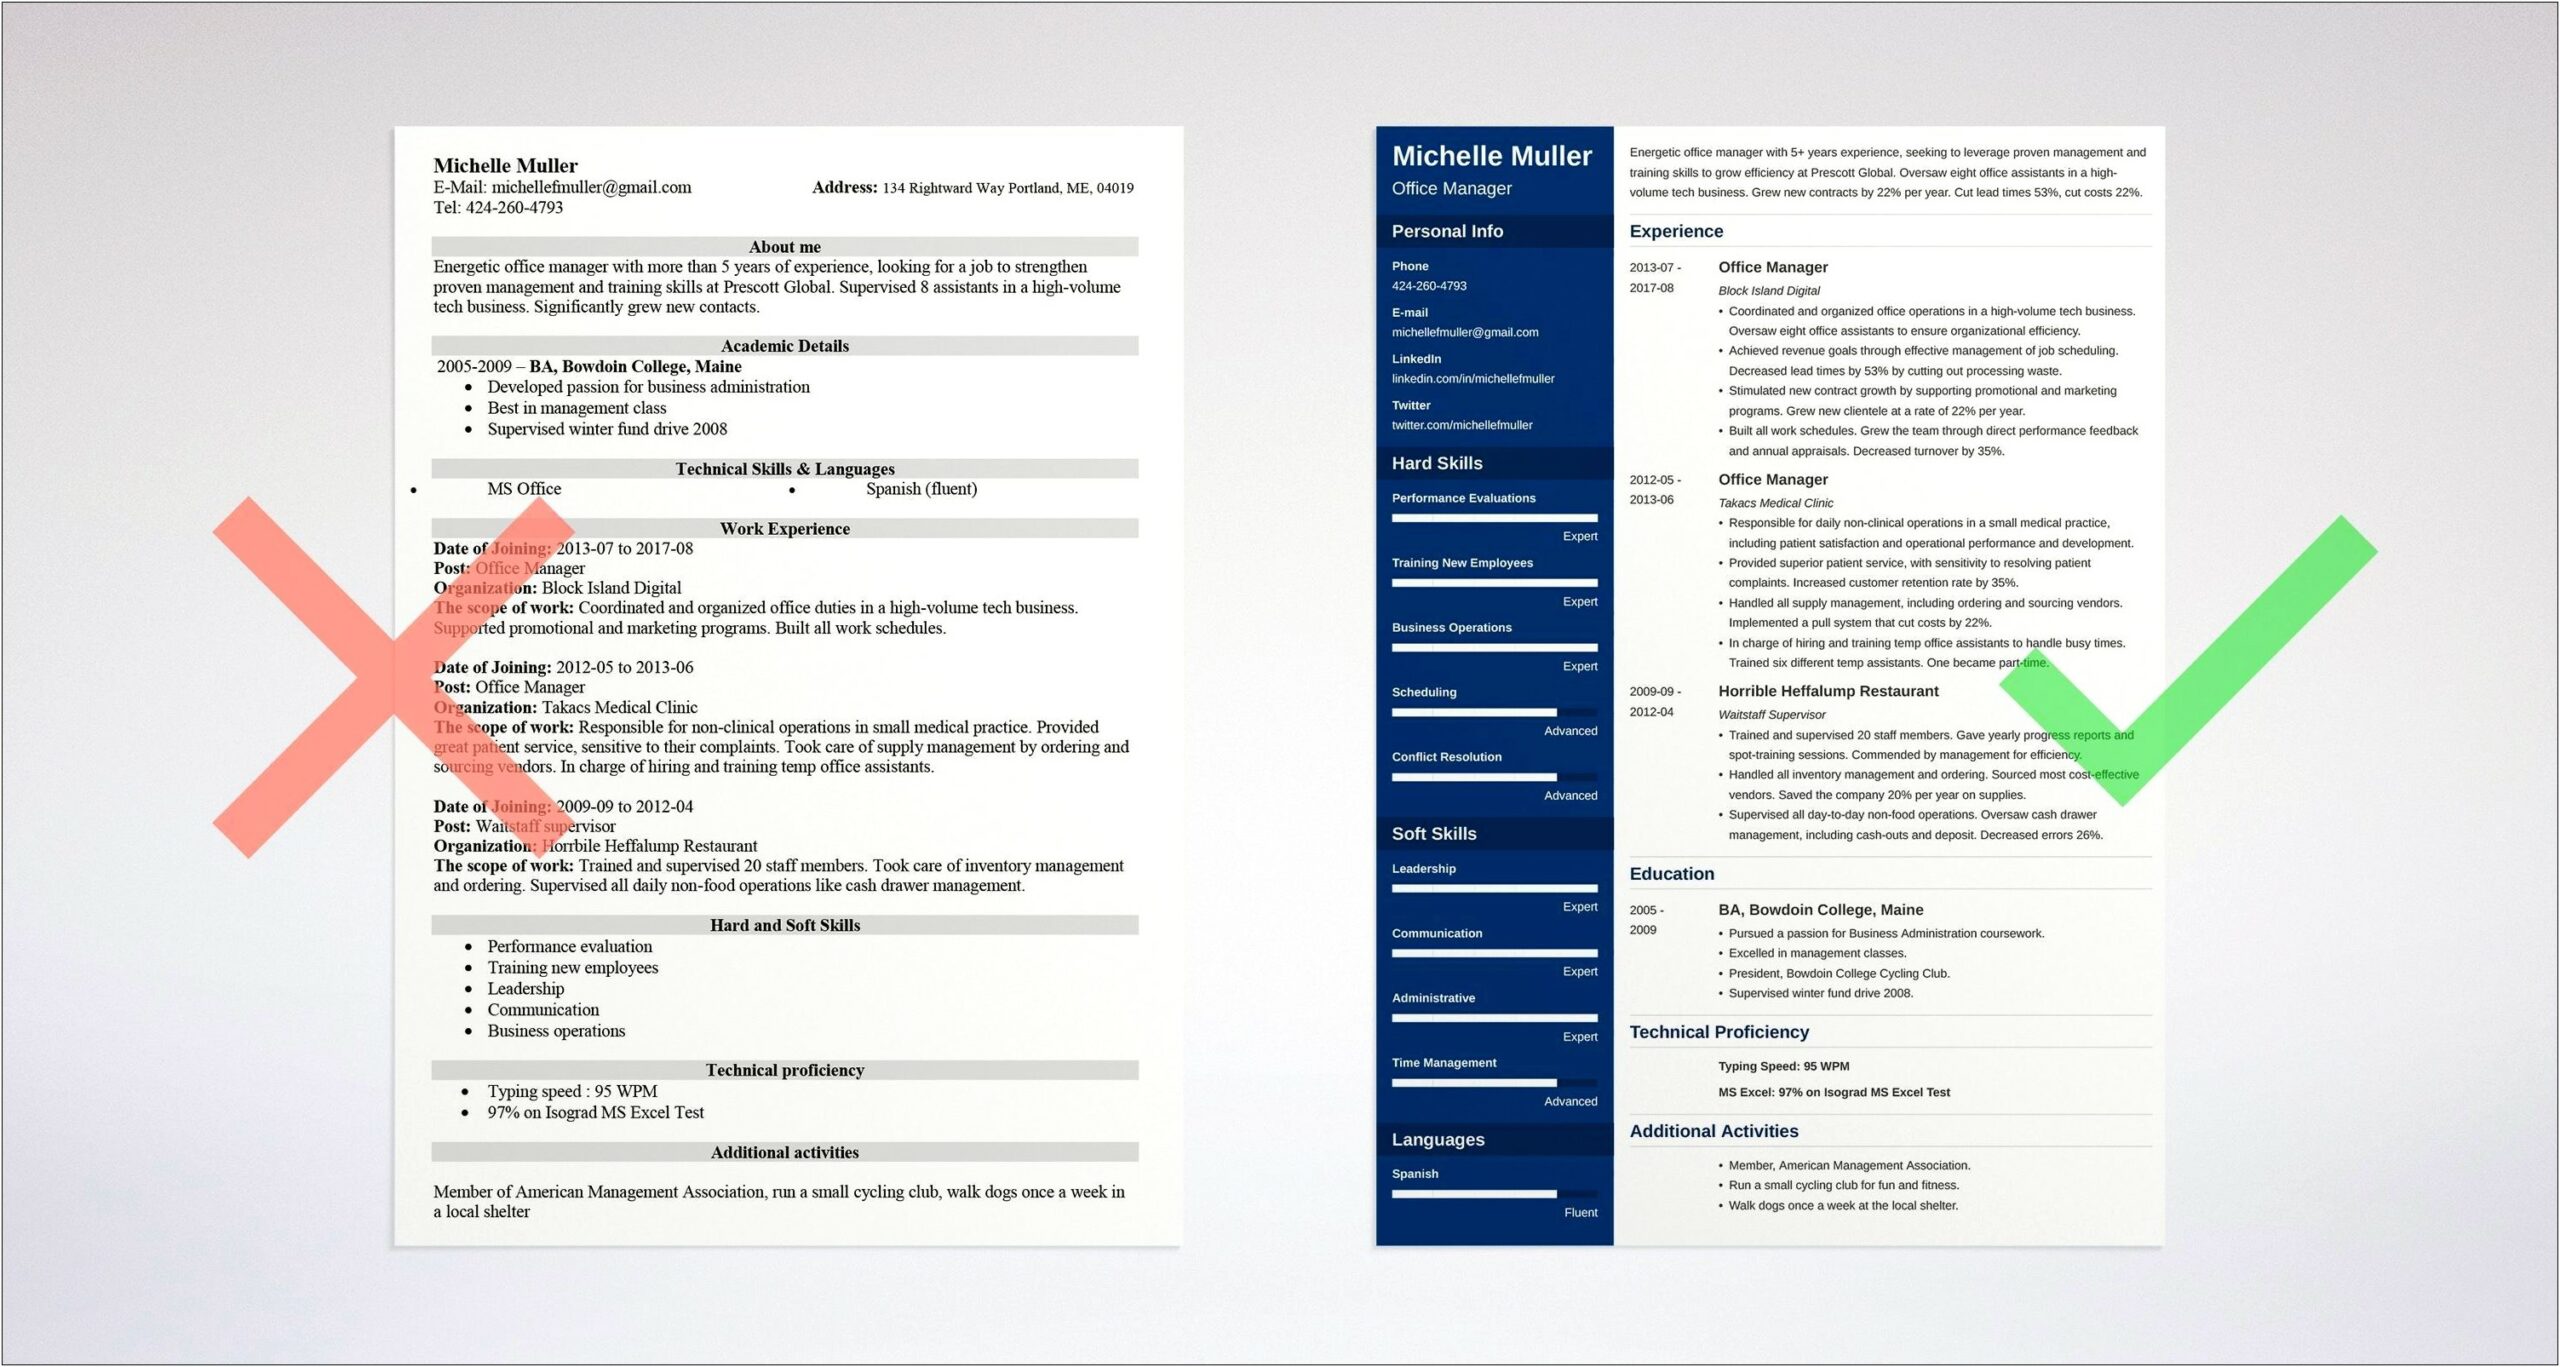 Resume Experience Examples For Office Manager